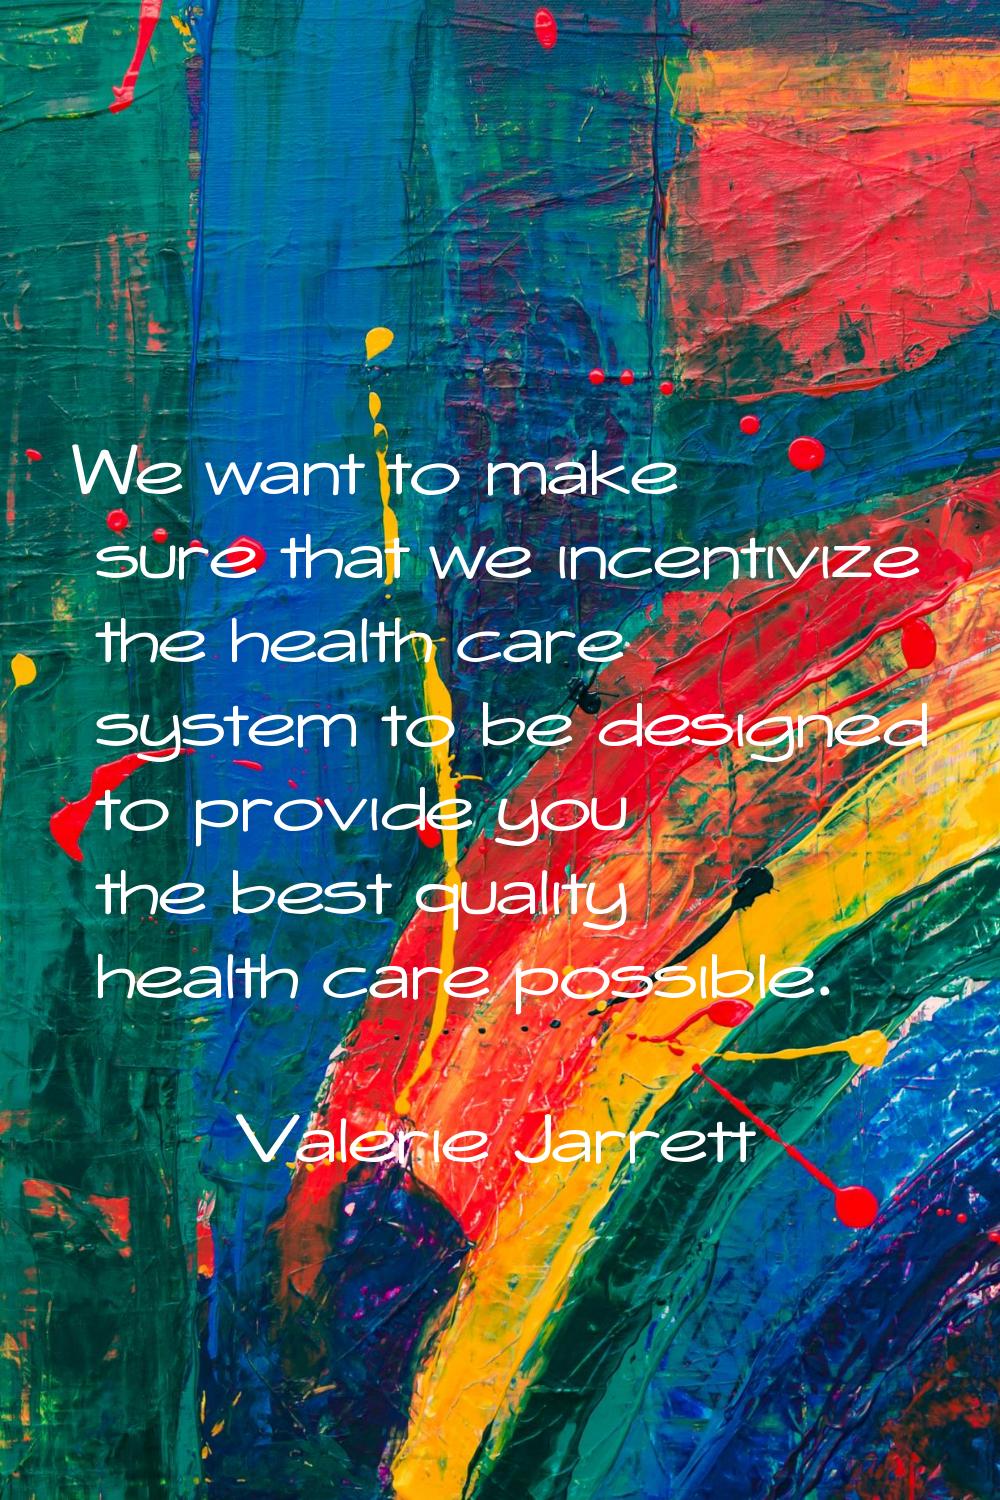 We want to make sure that we incentivize the health care system to be designed to provide you the b